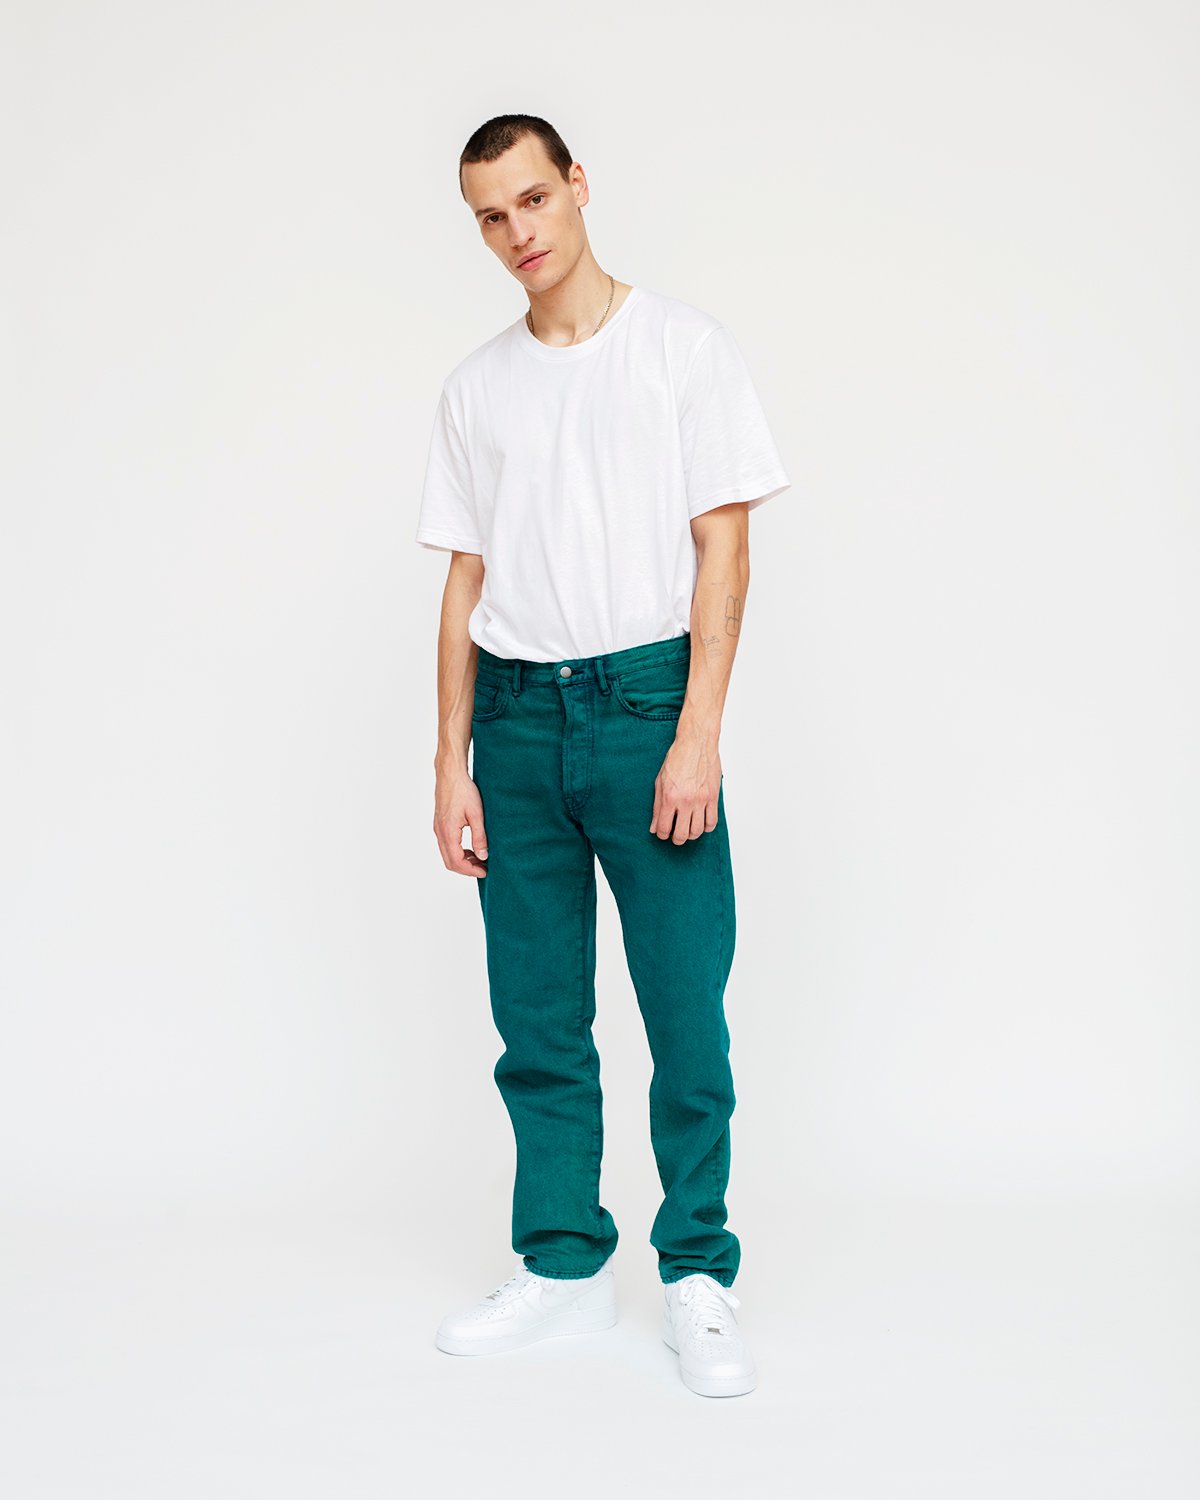 Acne Studios - Overdyed Jeans Jade Green - Clothing - Green - Image 5